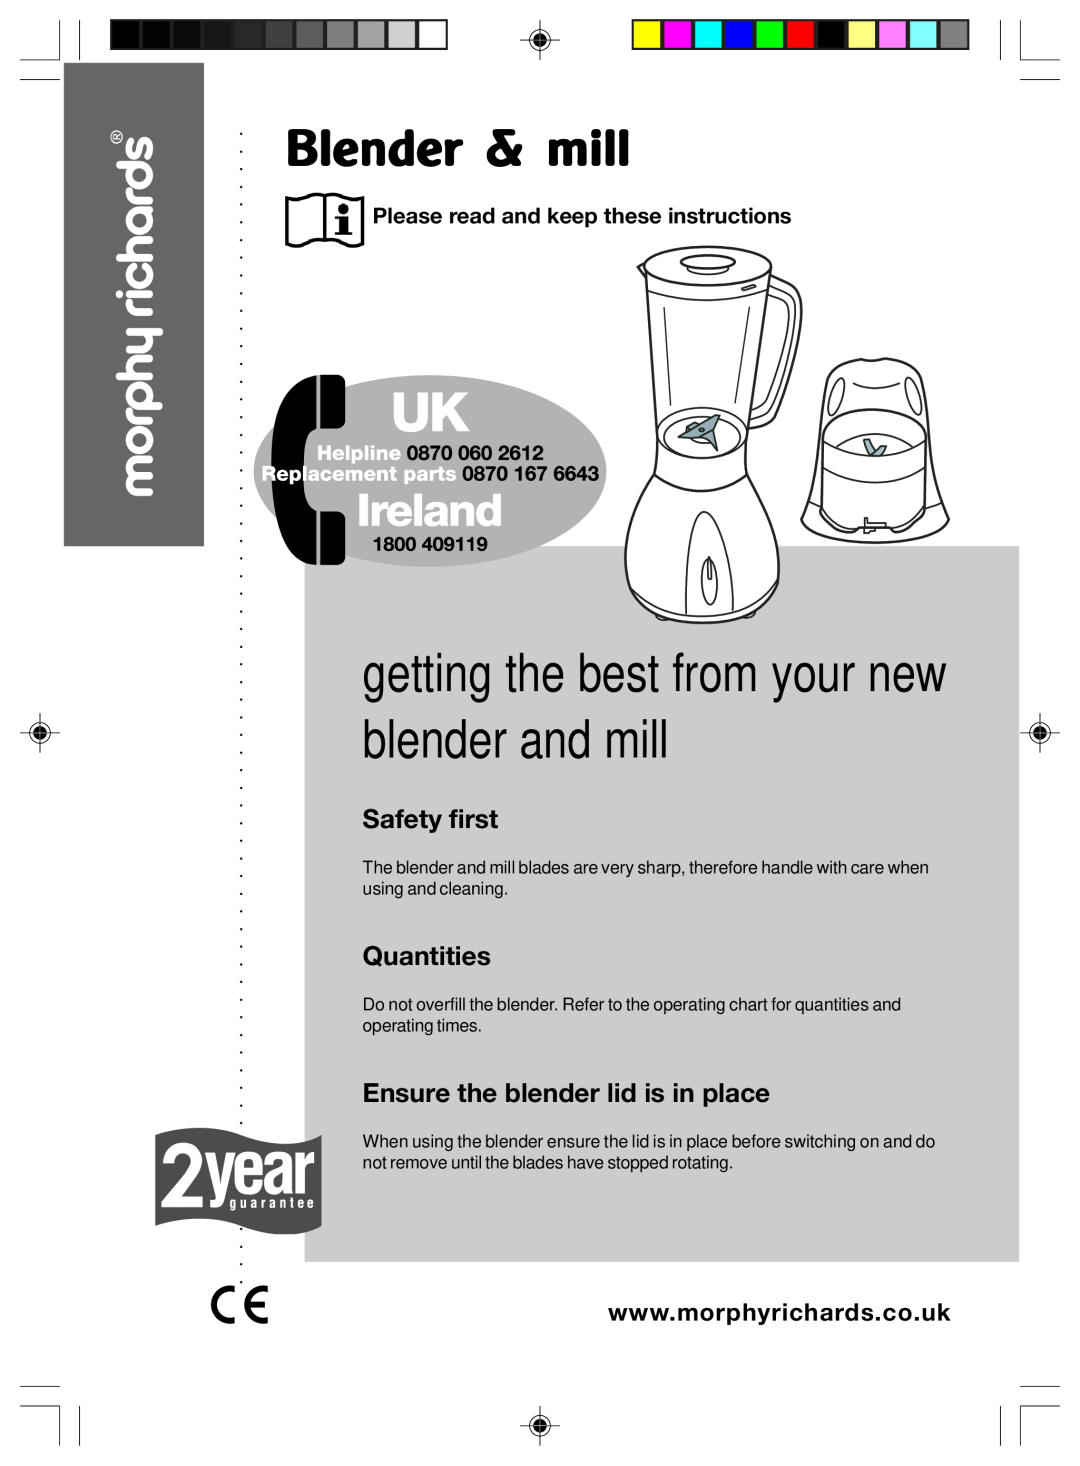 Morphy Richards Blender & mill manual Safety first, Quantities, Ensure the blender lid is in place 